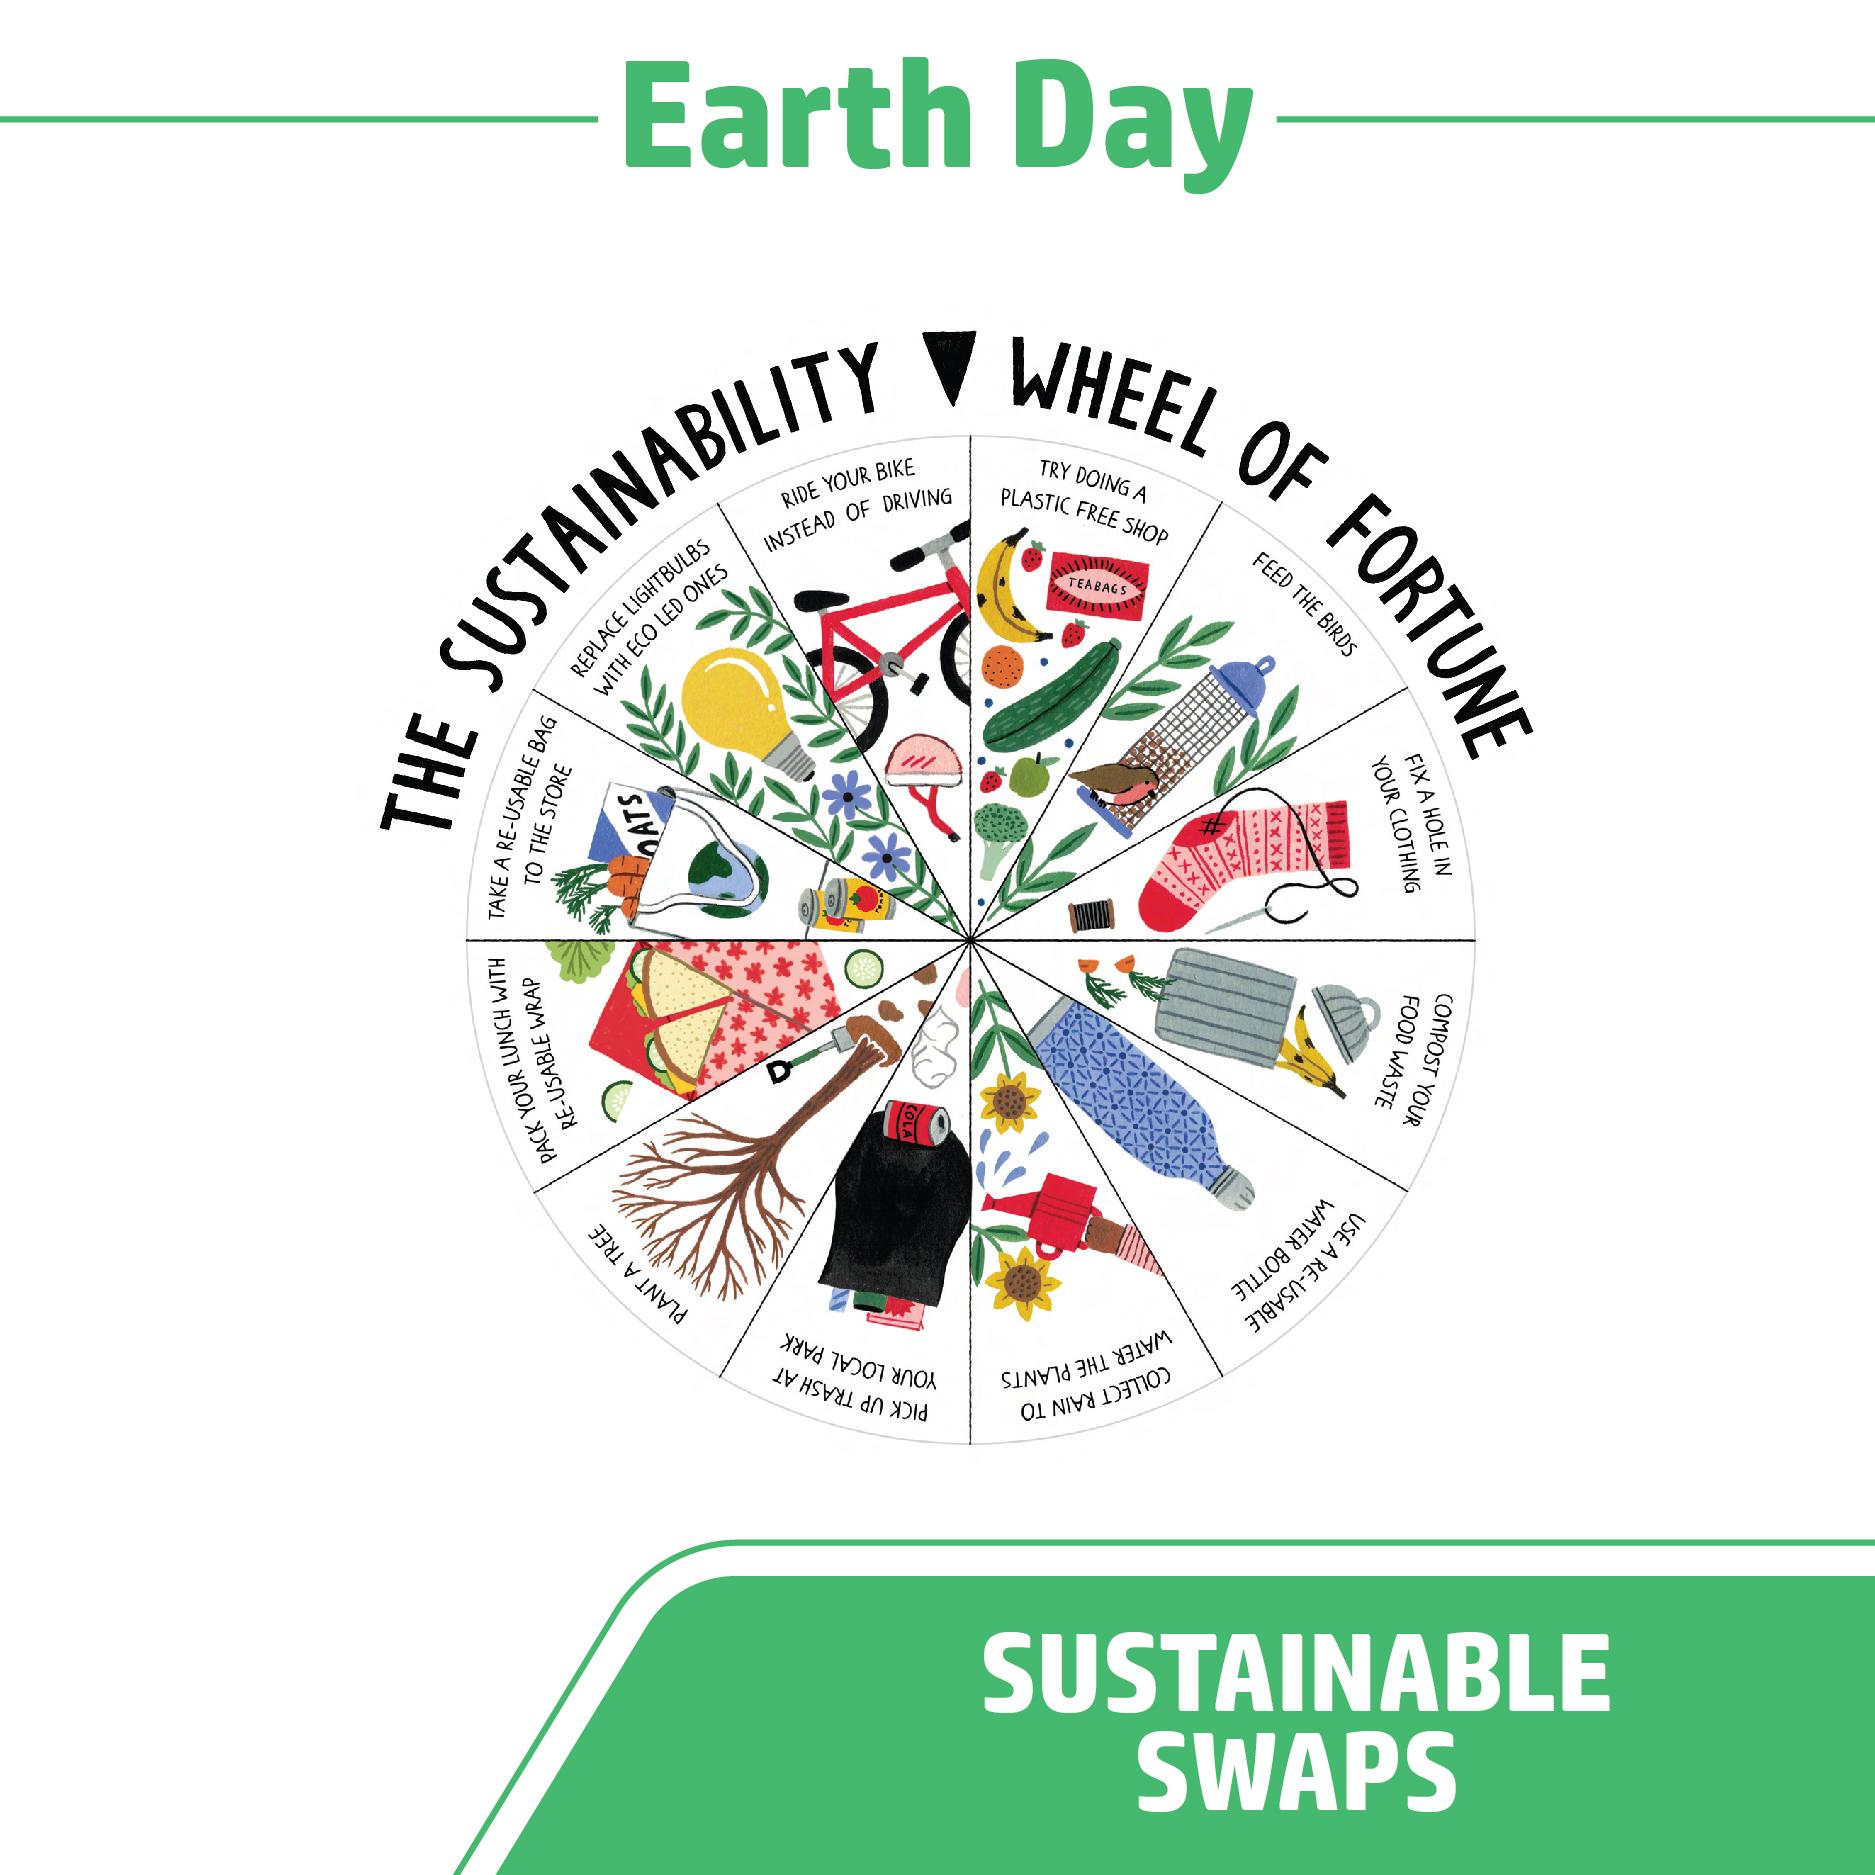 Sustainability And Conservation – Make Everyday Earth Day